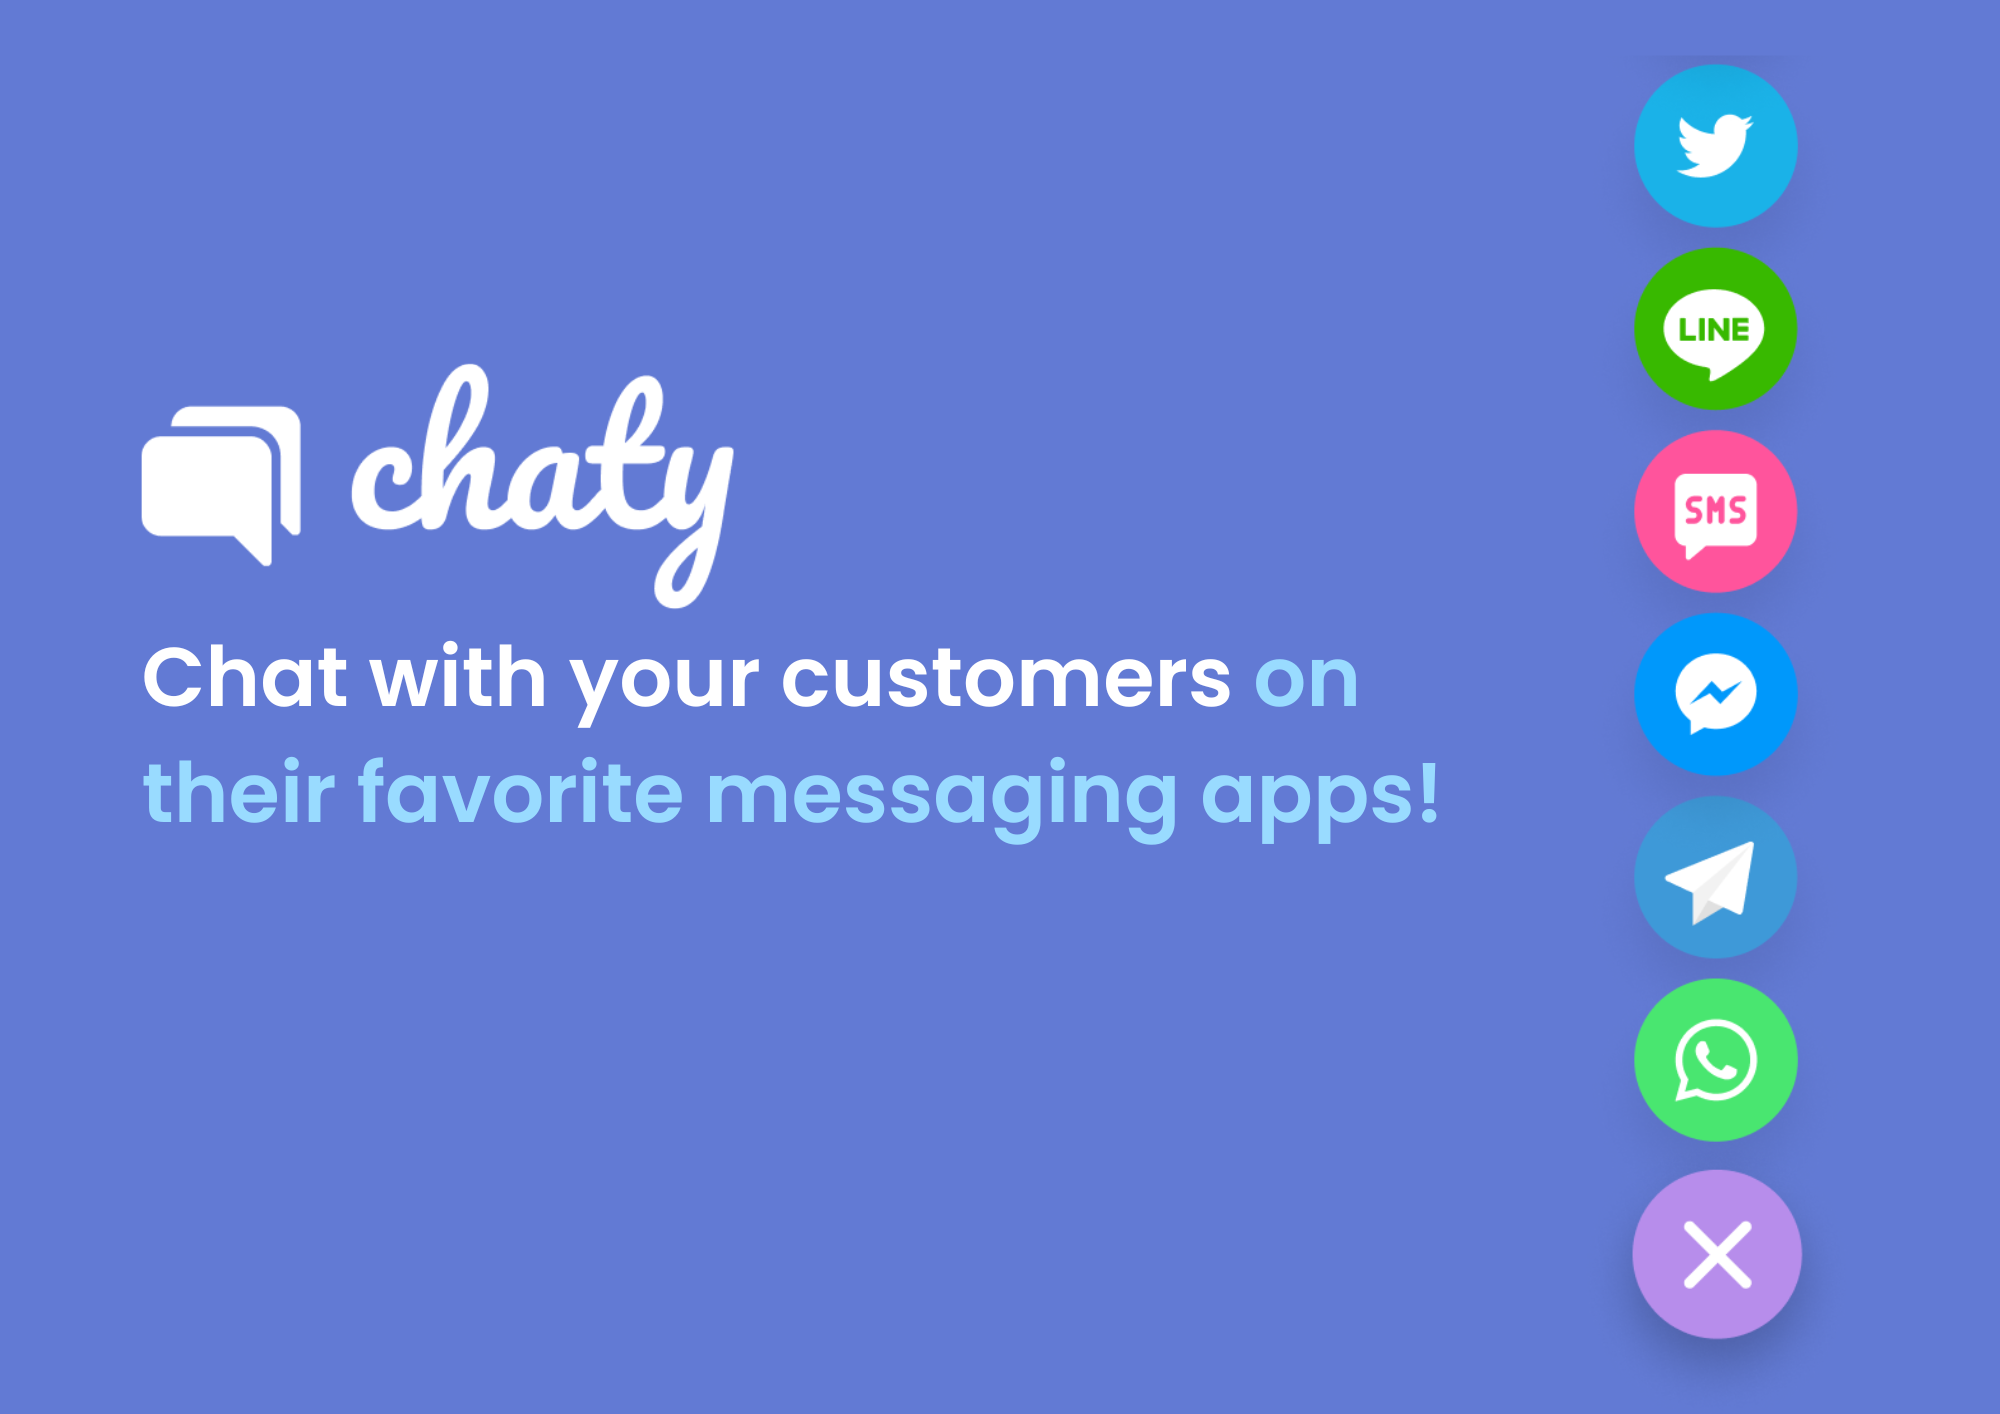 Use Chaty to connect your website to WhatsApp, Facebook Messenger, Telegram, and 20+ other chat channels